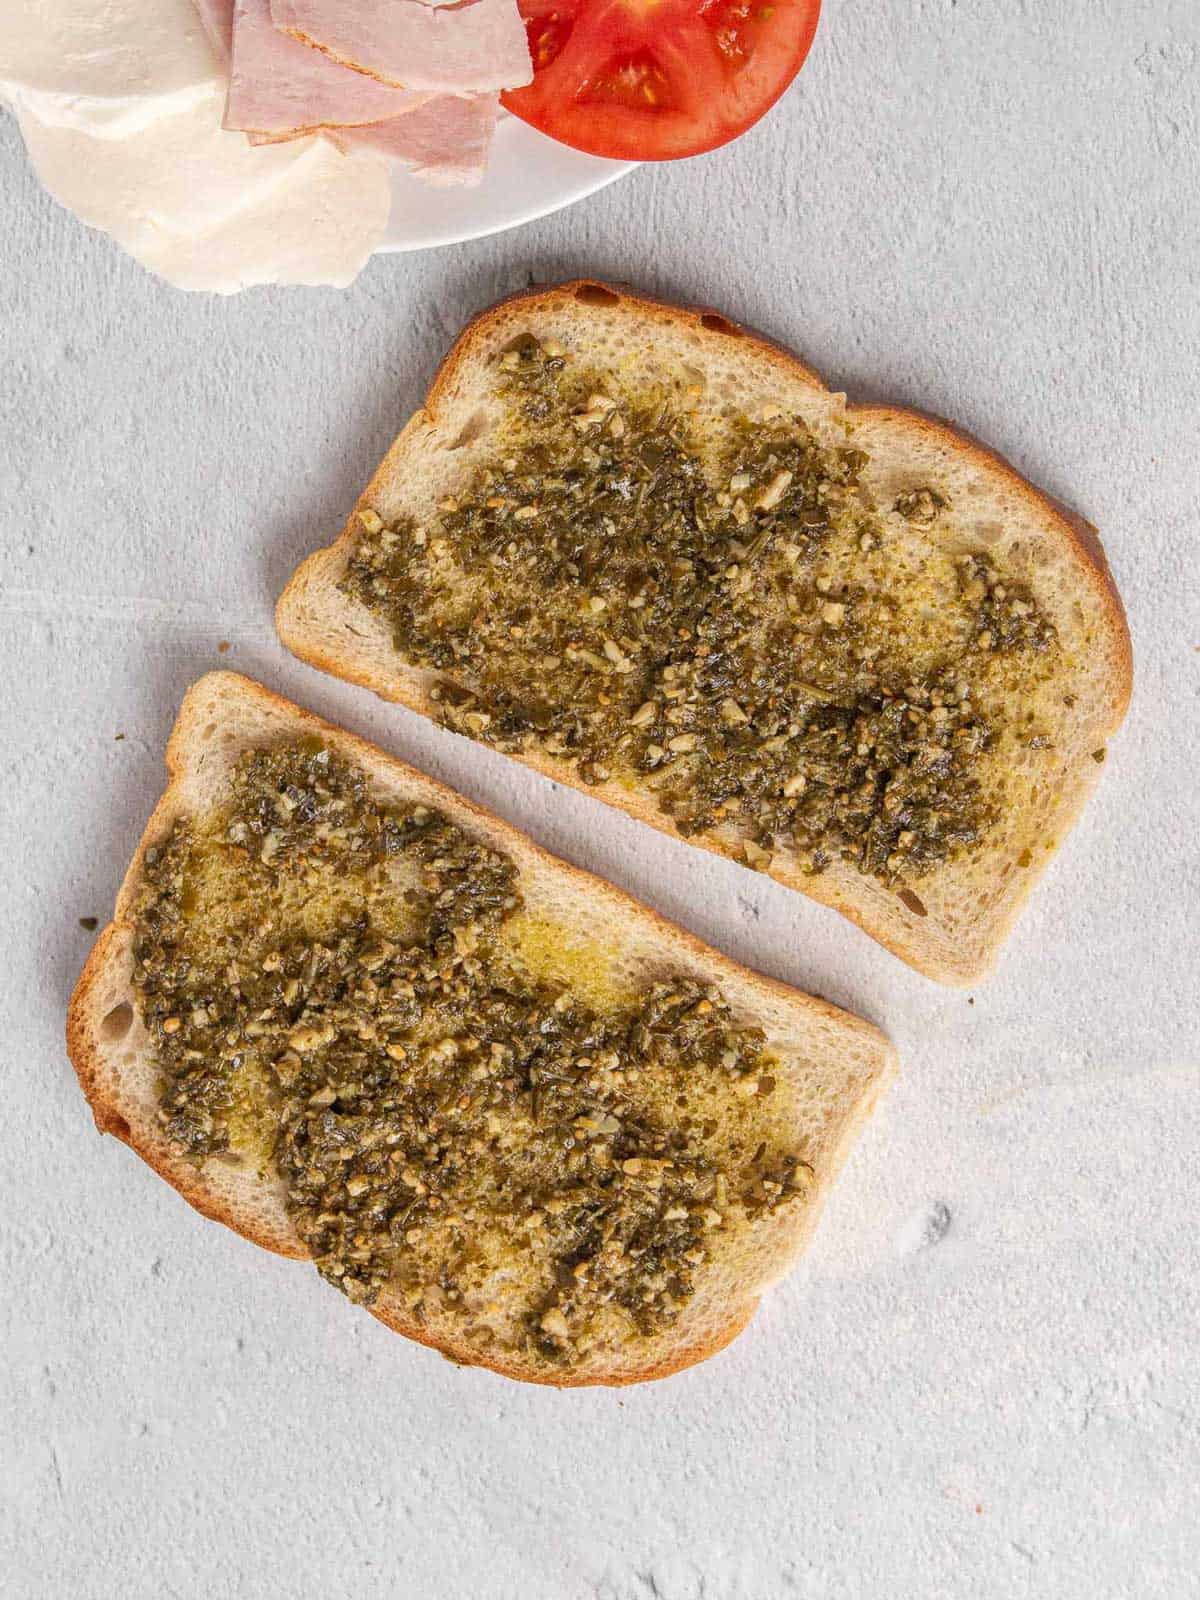 Two pieces of sourdough bread with pesto layered across the top.